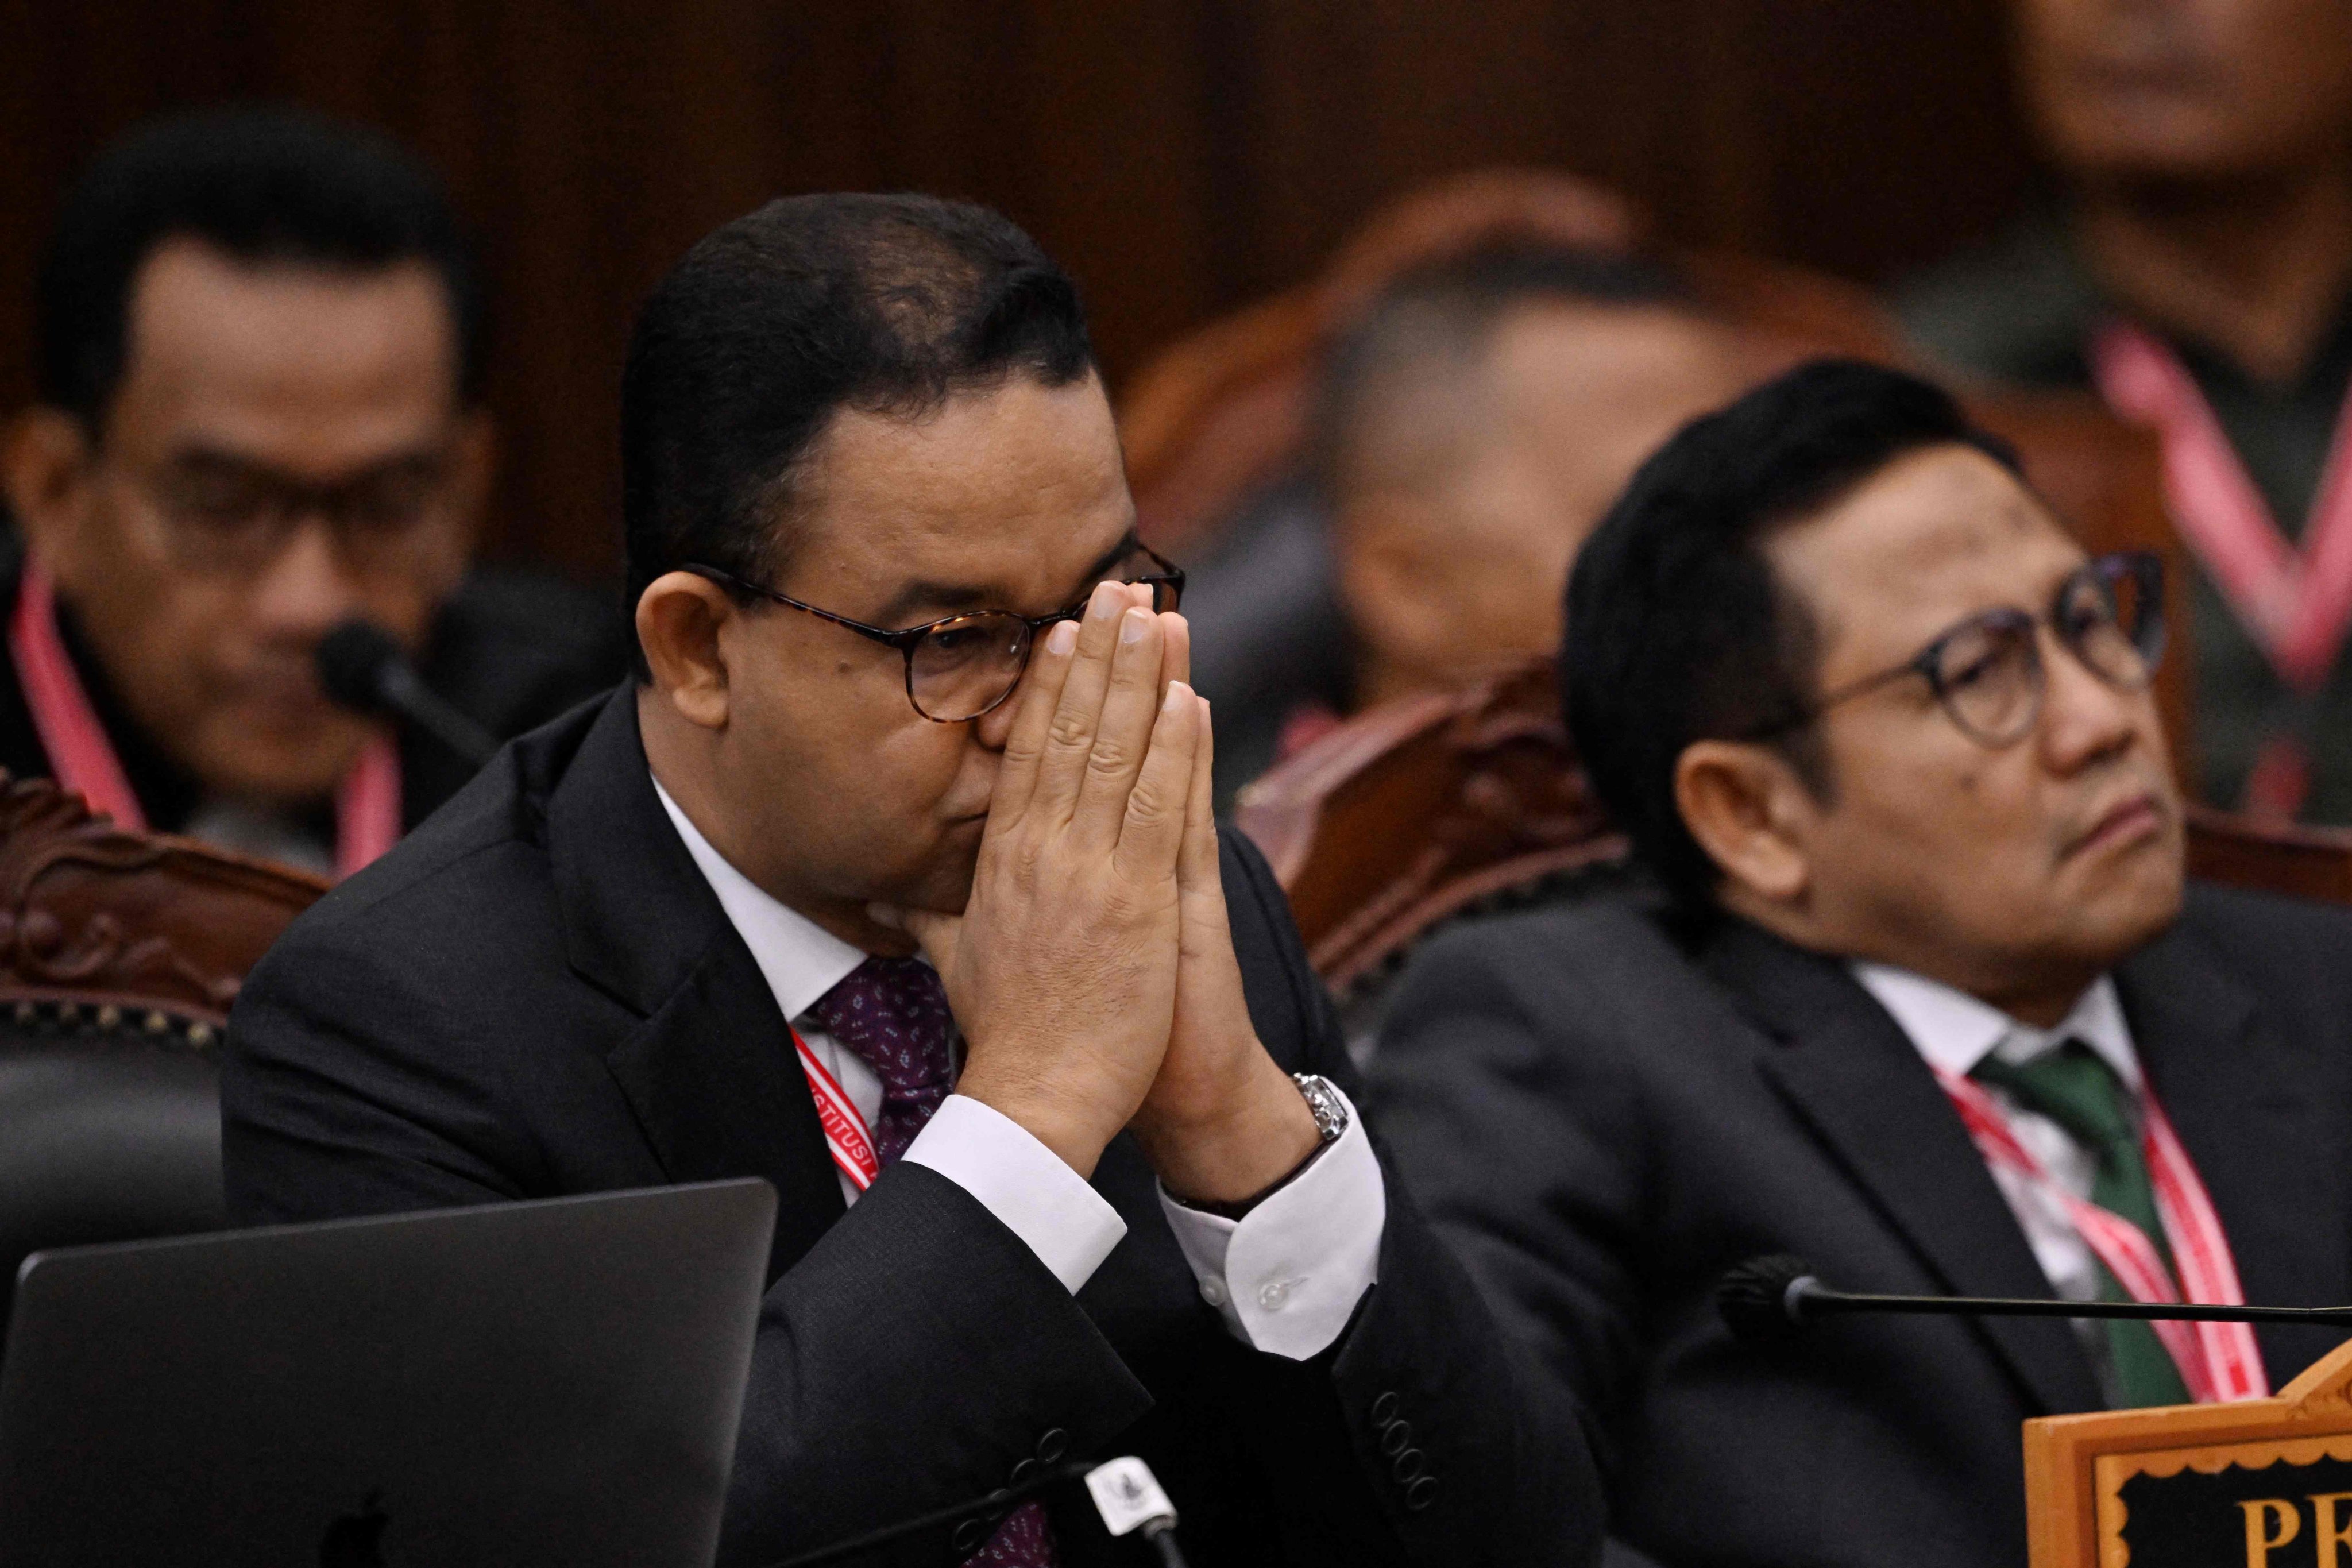 Presidential election challengers Anies Baswedan (L) and Muhaimin Iskandar (R) attend a hearing at the Constitutional Court in Jakarta on April 22. Photo: AFP